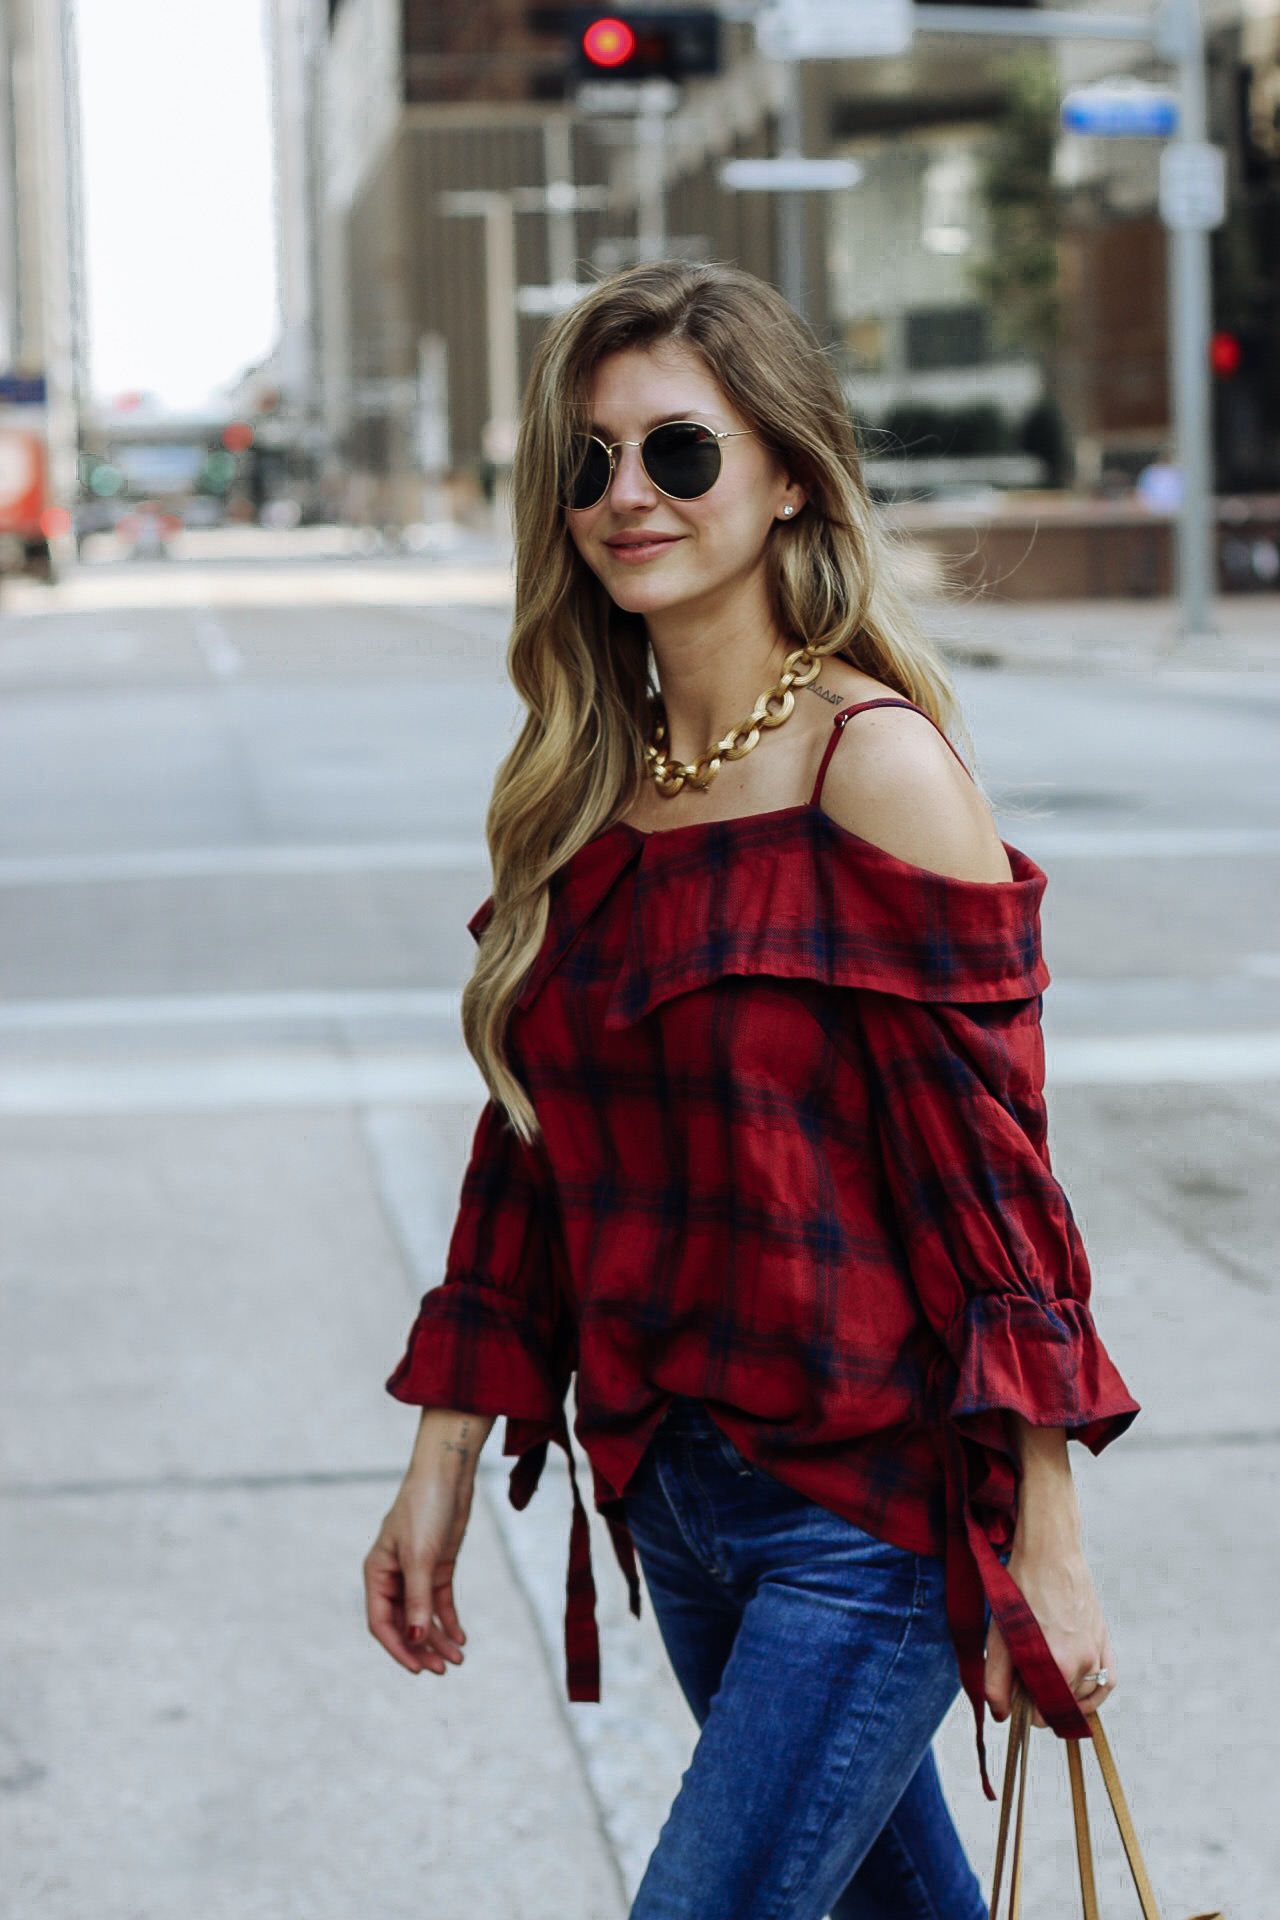 An off the shoulder staple piece in AshLee Frazier's closet.